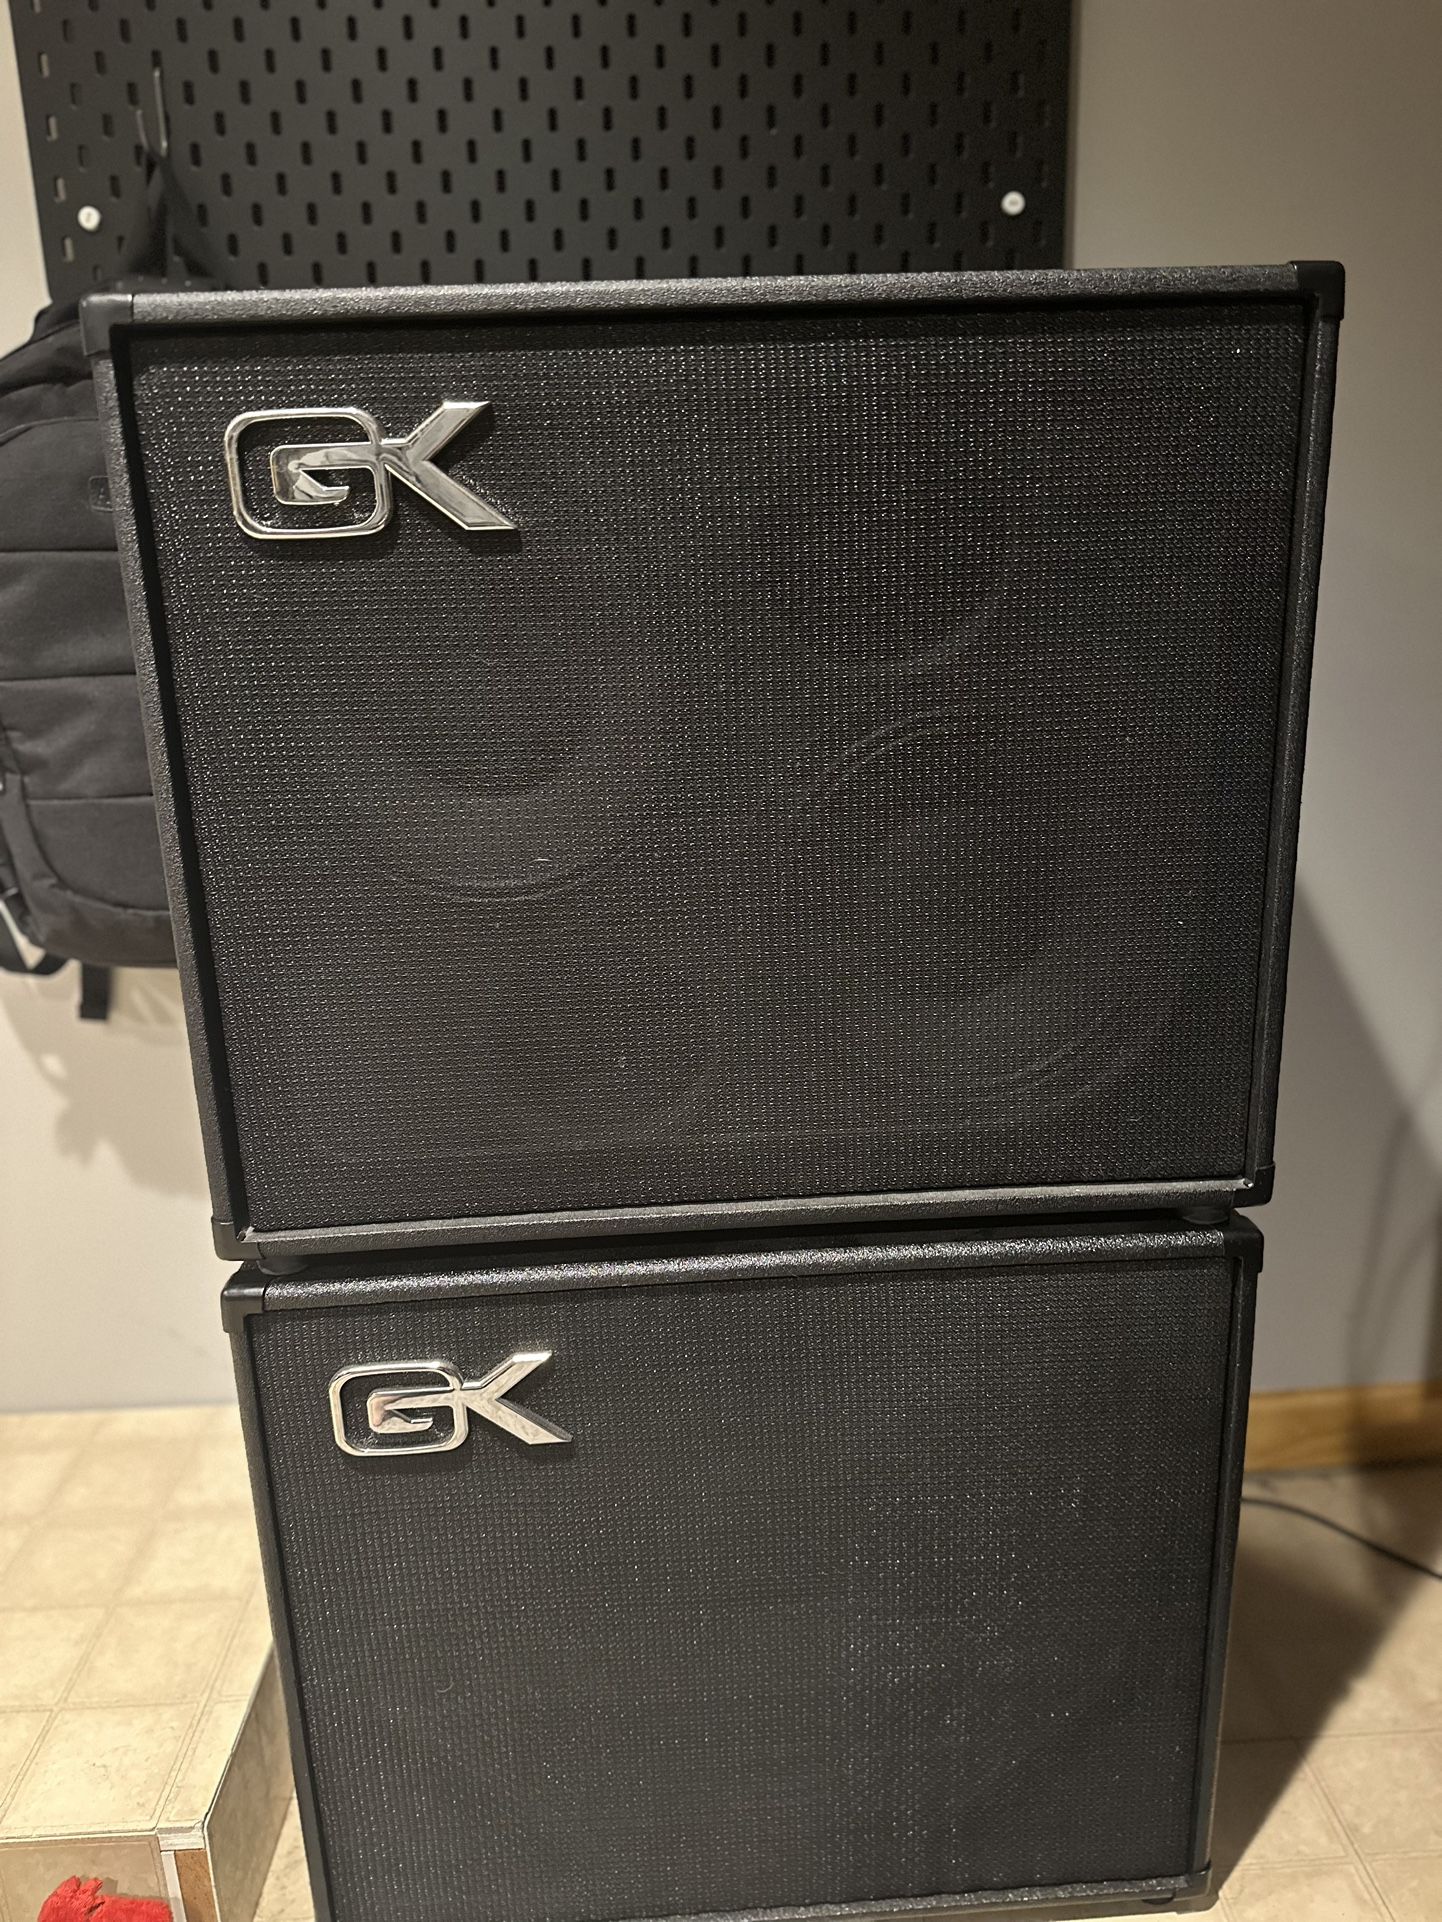 Bass Amp Cabs - GK CX210 and CX115